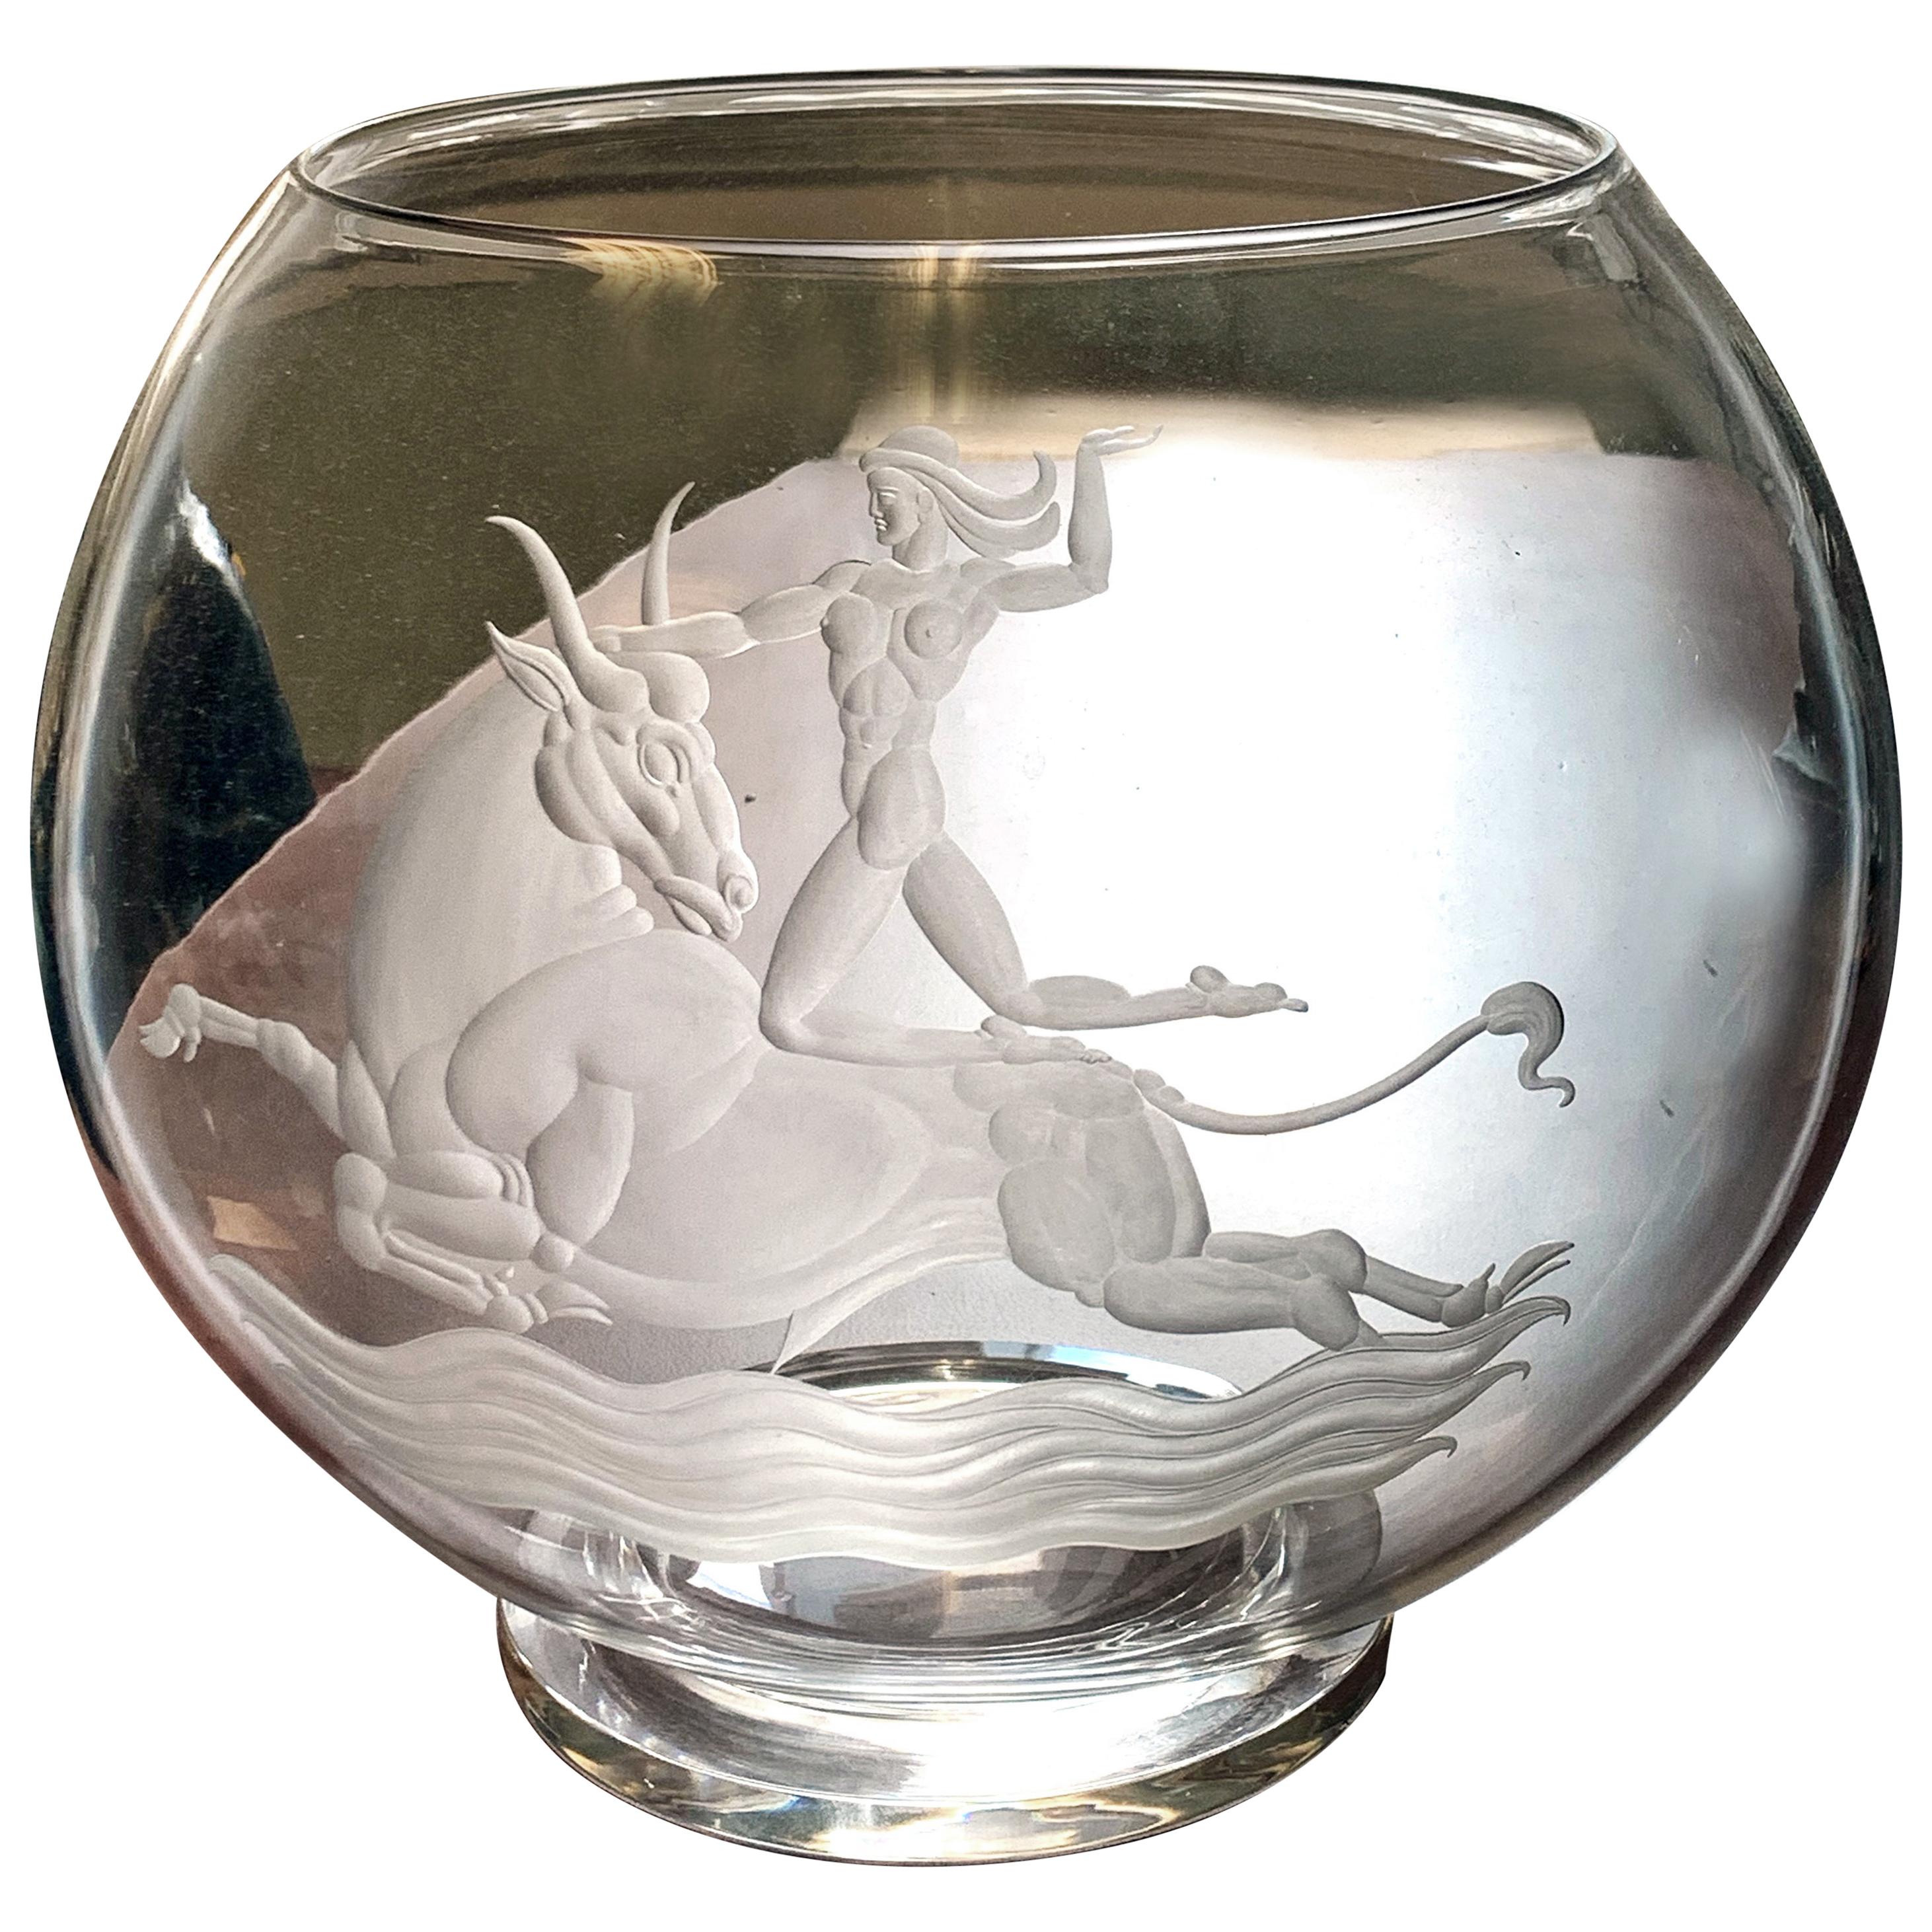 "Europa & the Bull, " Art Deco Masterpiece in Engraved Glass by Waugh for Steuben